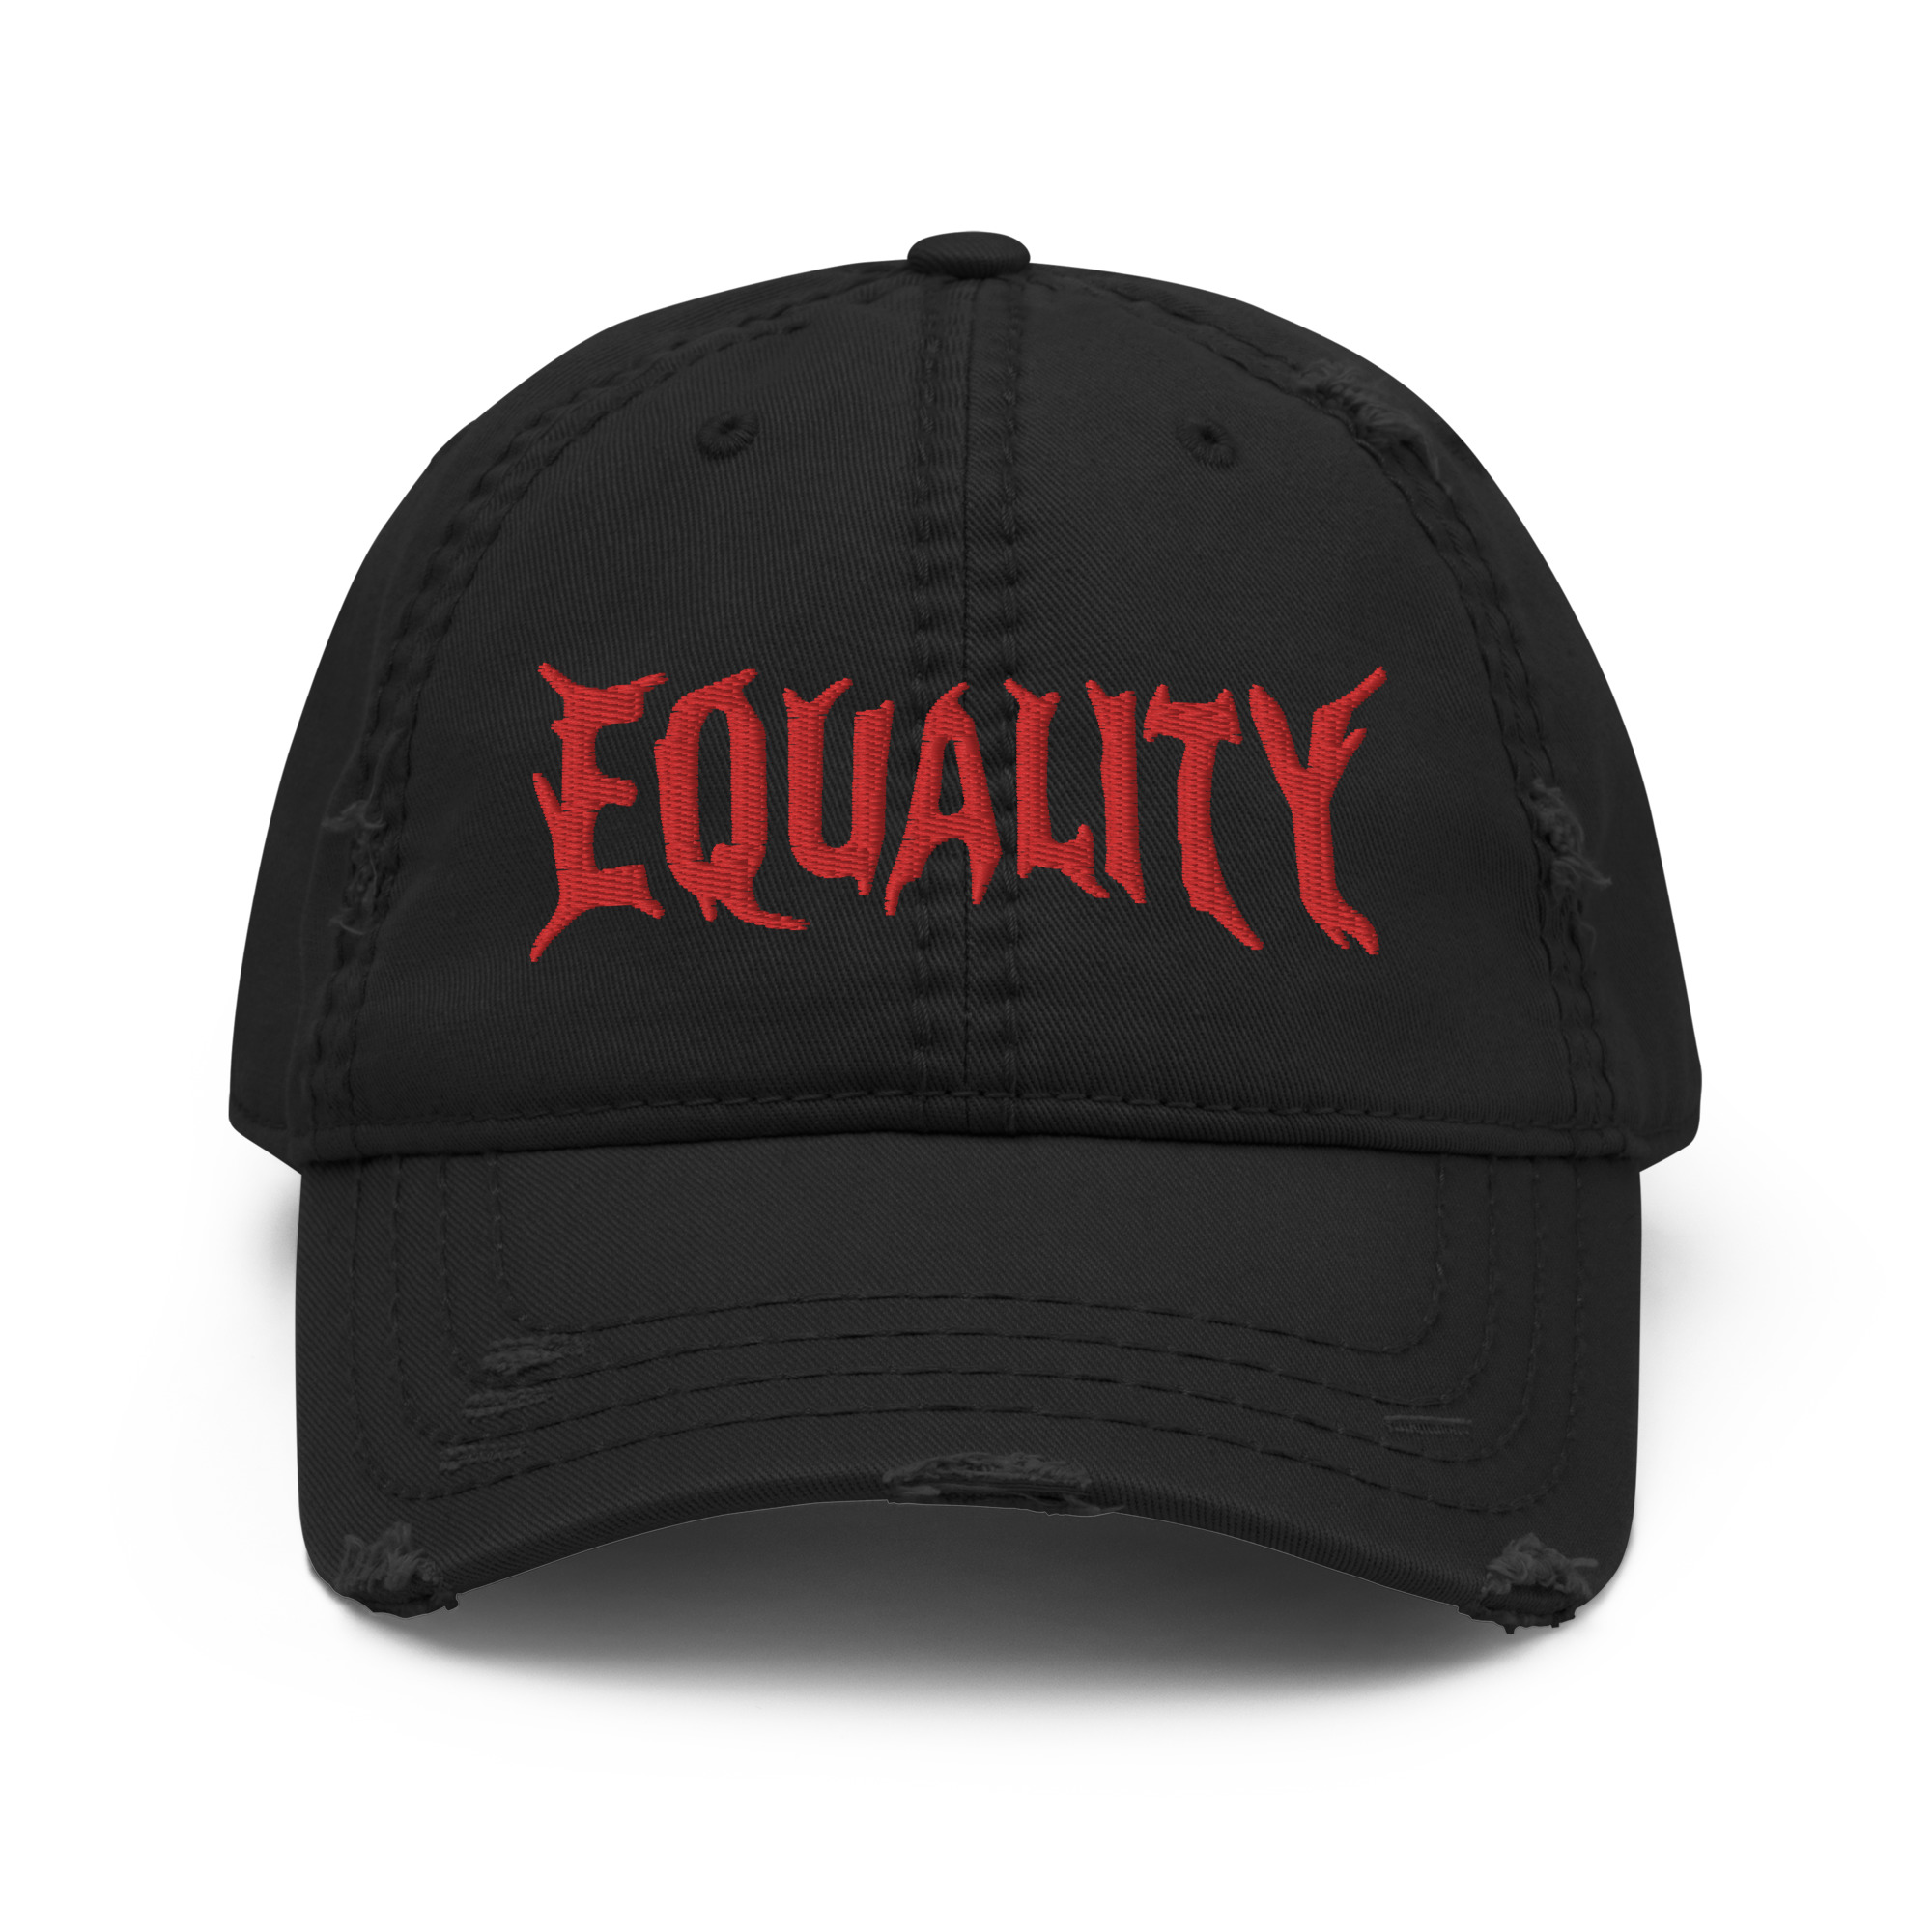 Featured image for “Equality - Distressed Dad Hat”